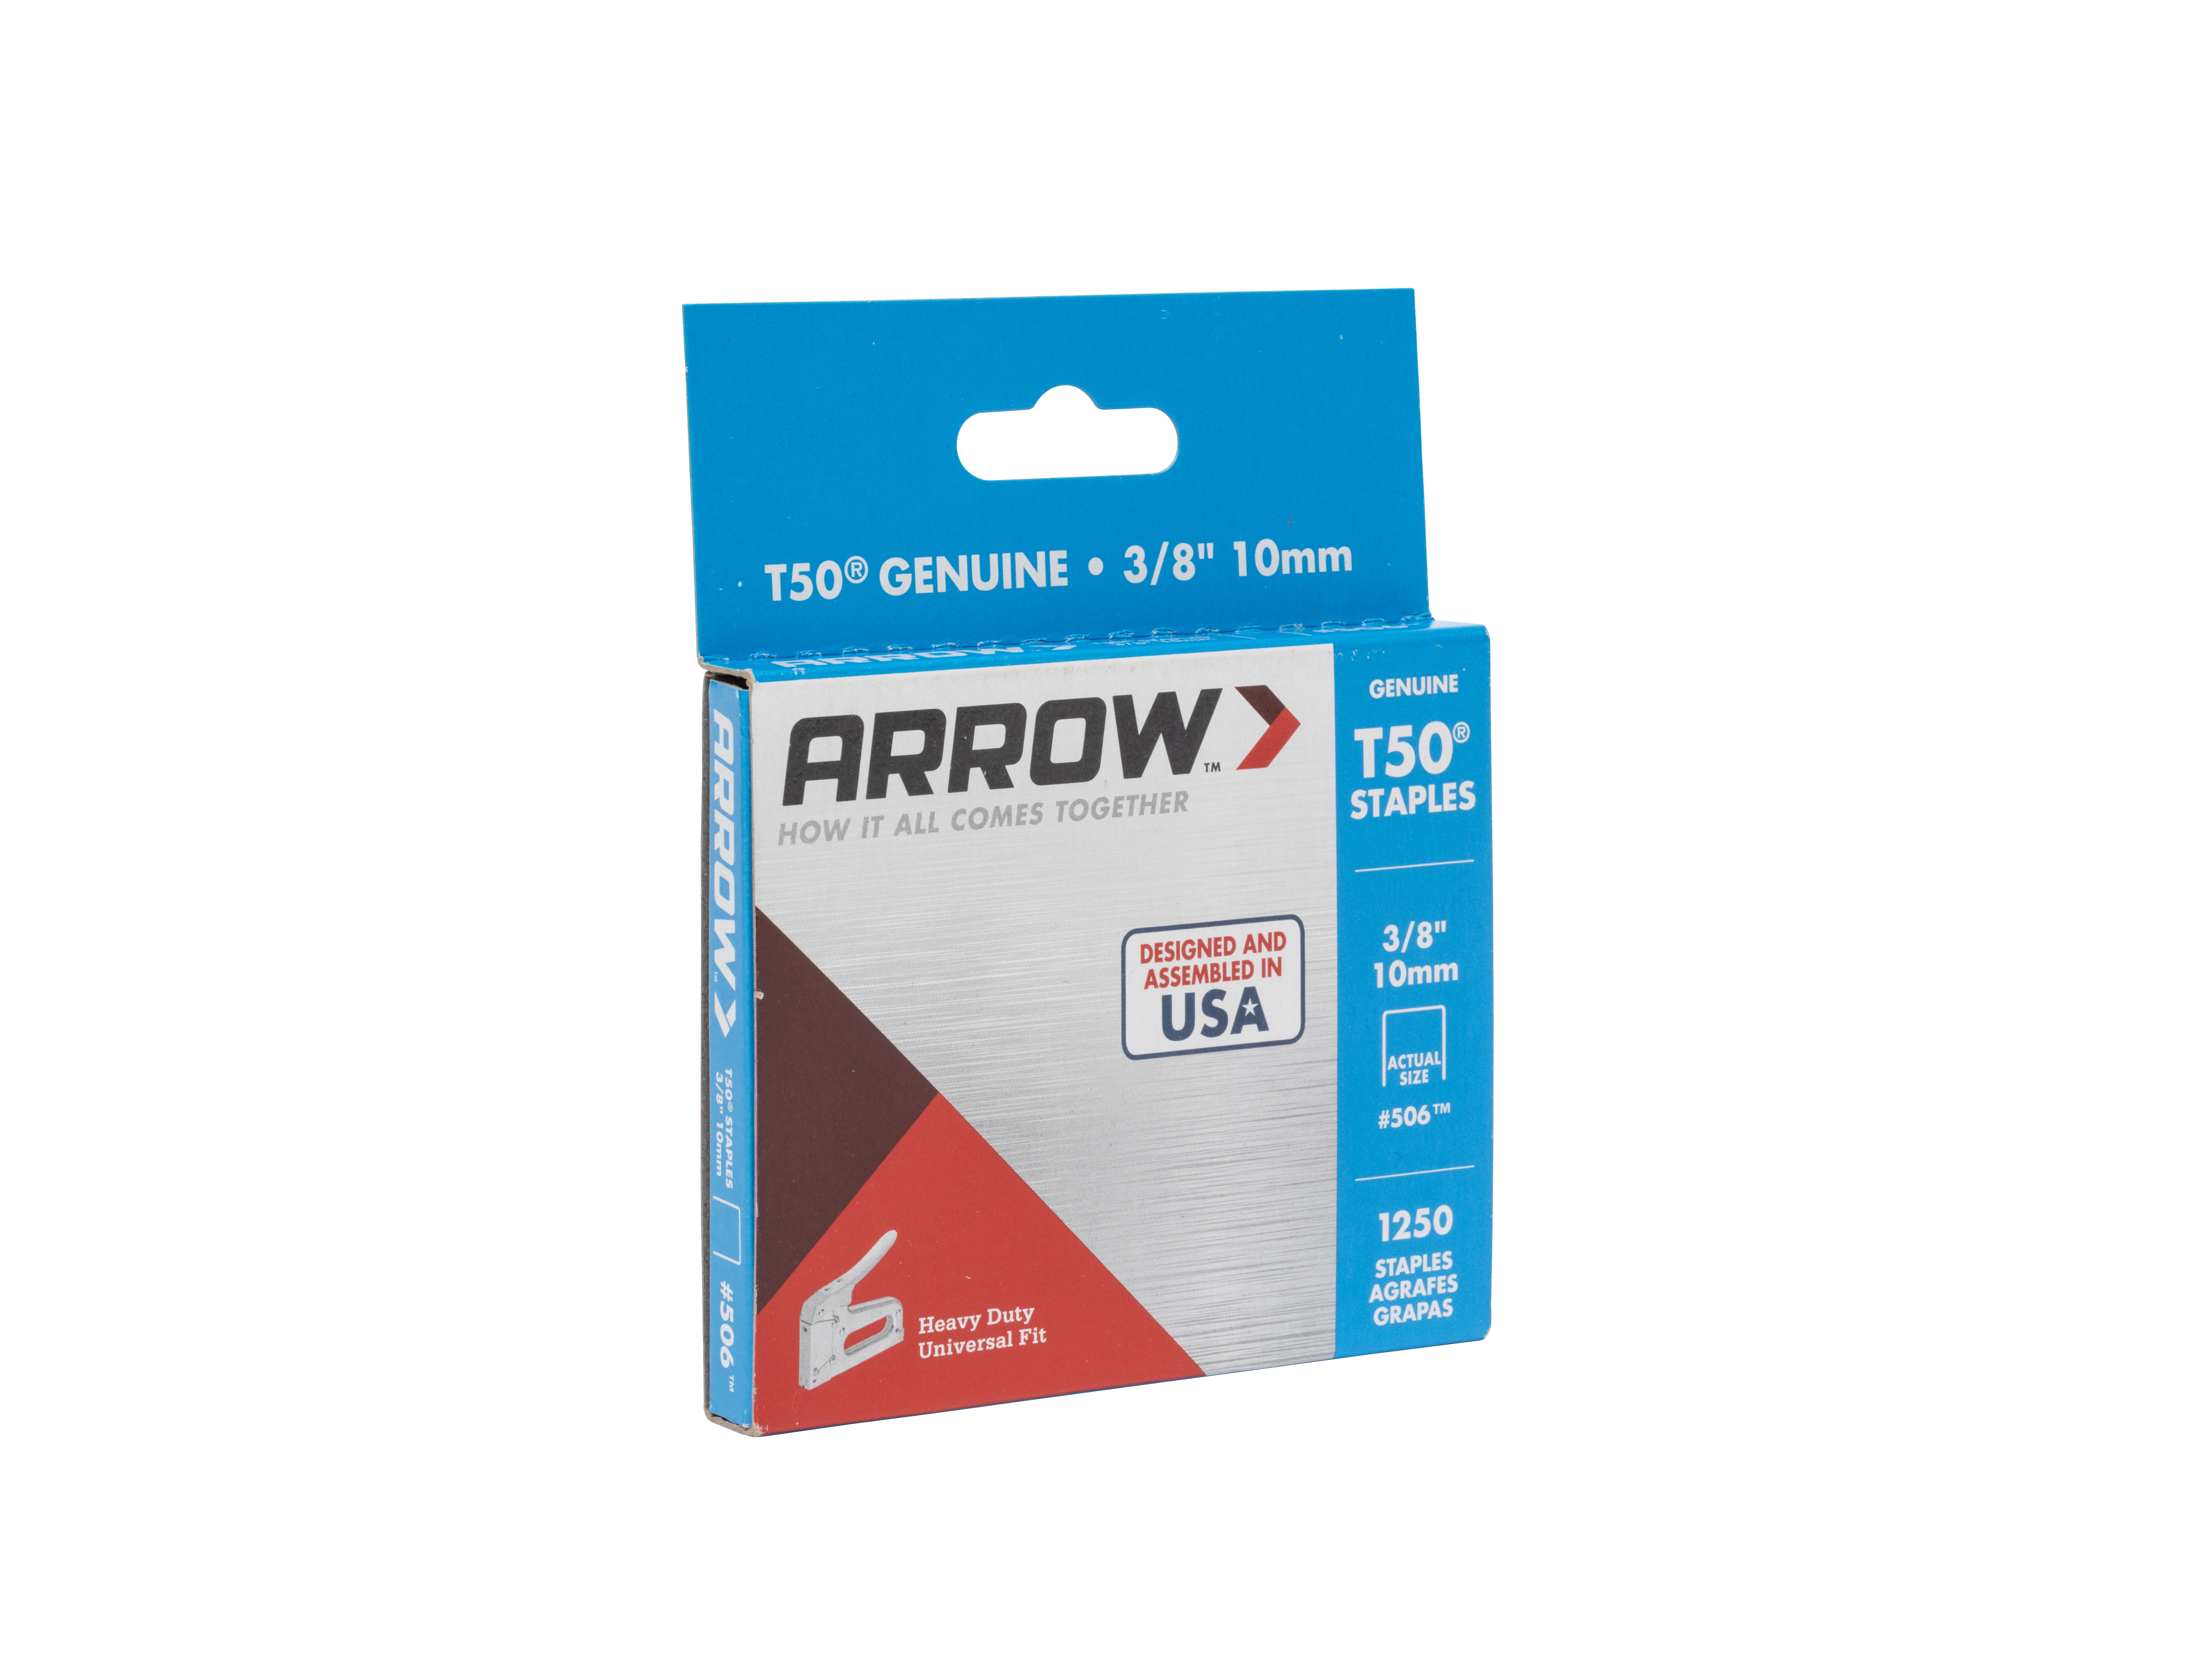 Arrow T50 Staples 3/8" 10mm staples 1250 ct New made in the USA 